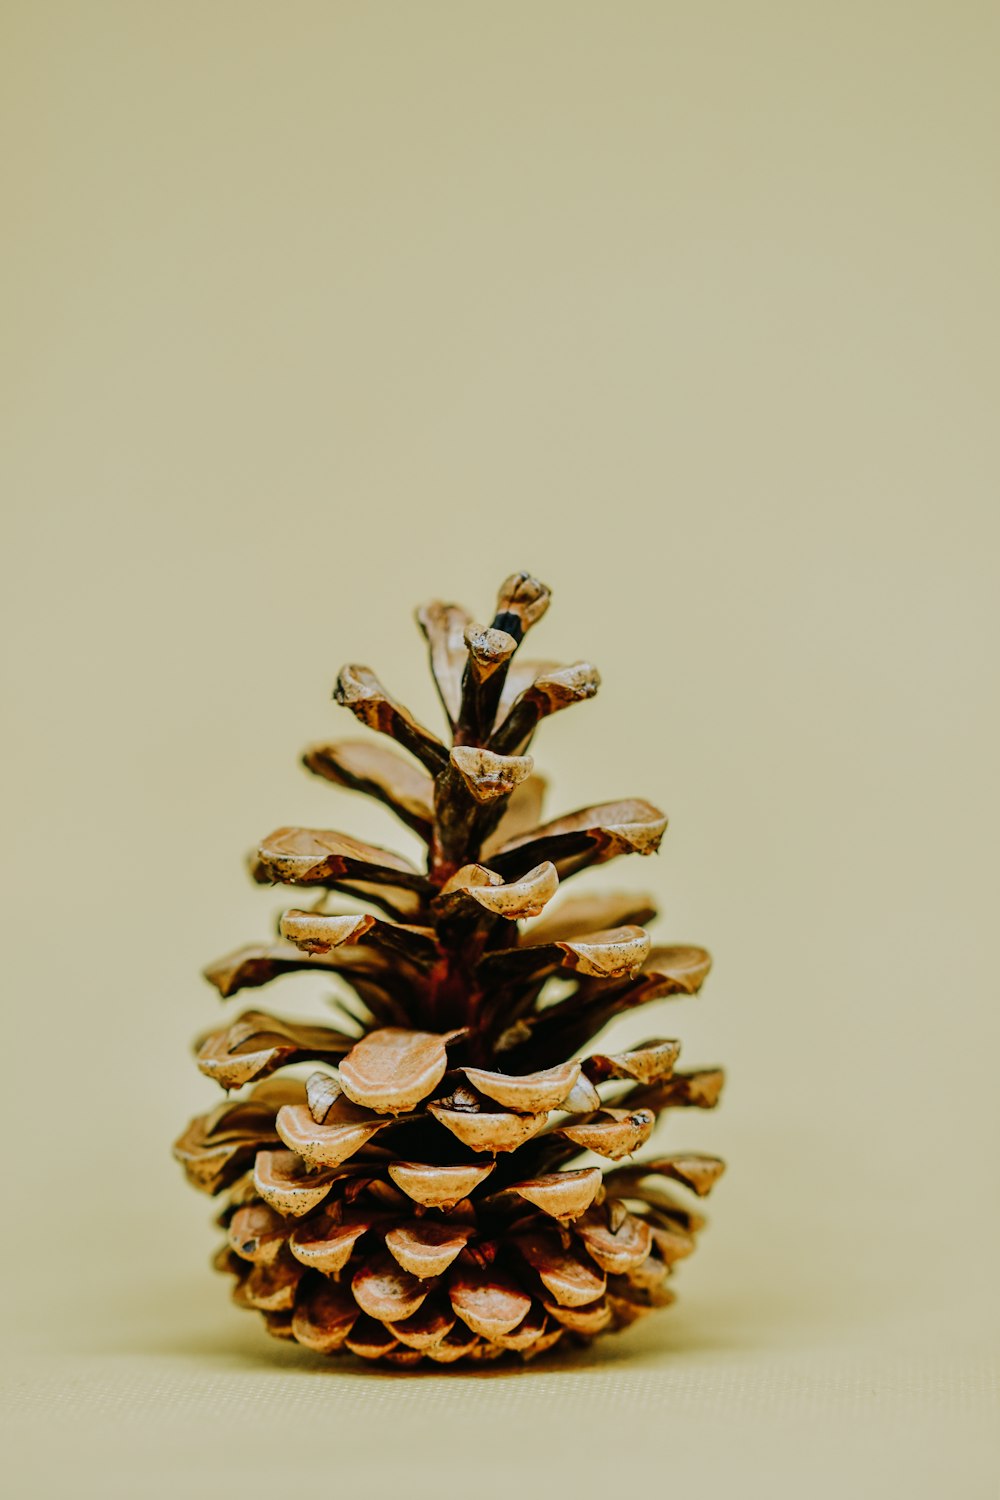 Pine branches with pine cones - a Royalty Free Stock Photo from